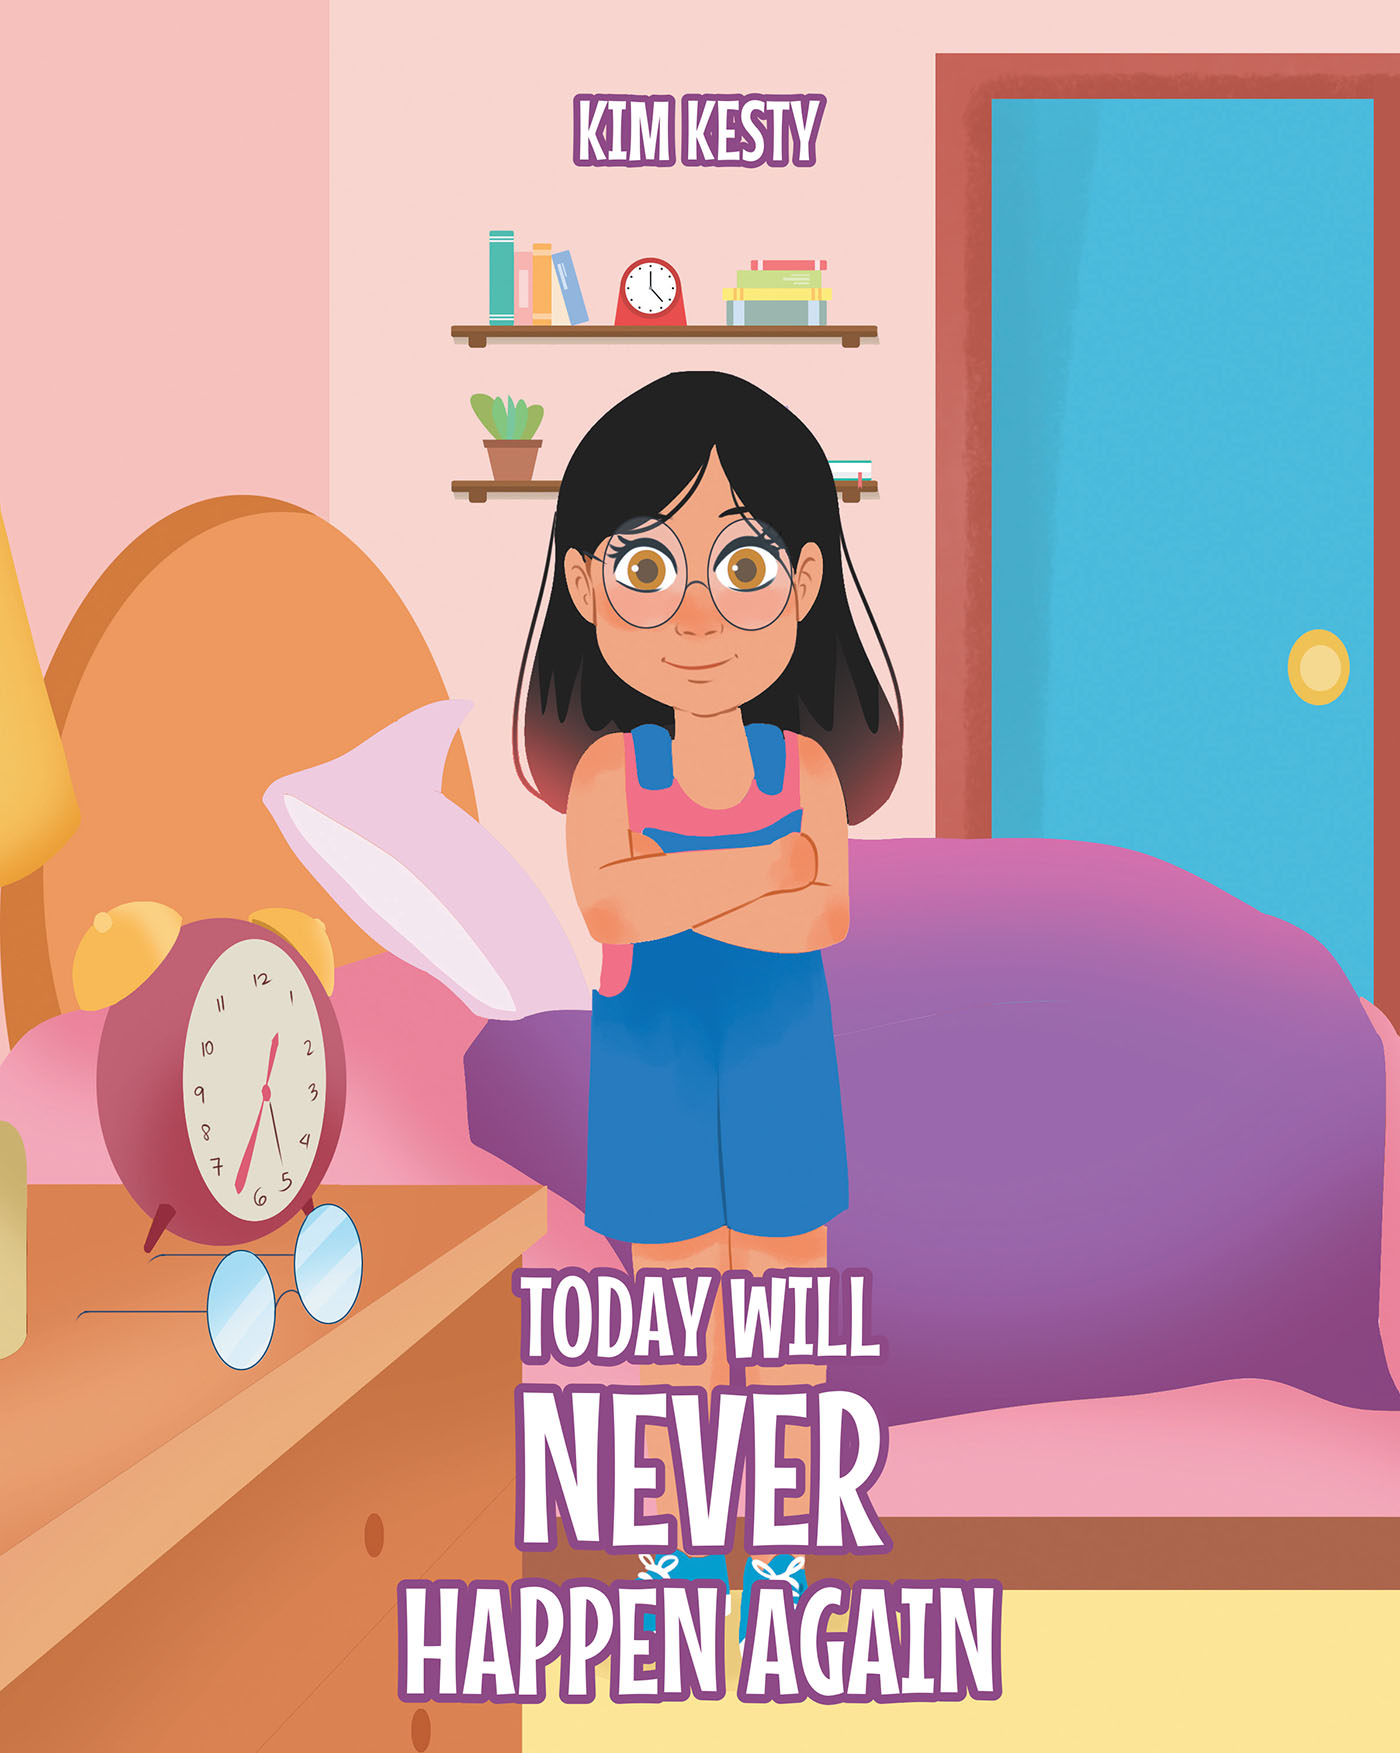 TODAY WILL NEVER HAPPEN AGAIN Cover Image